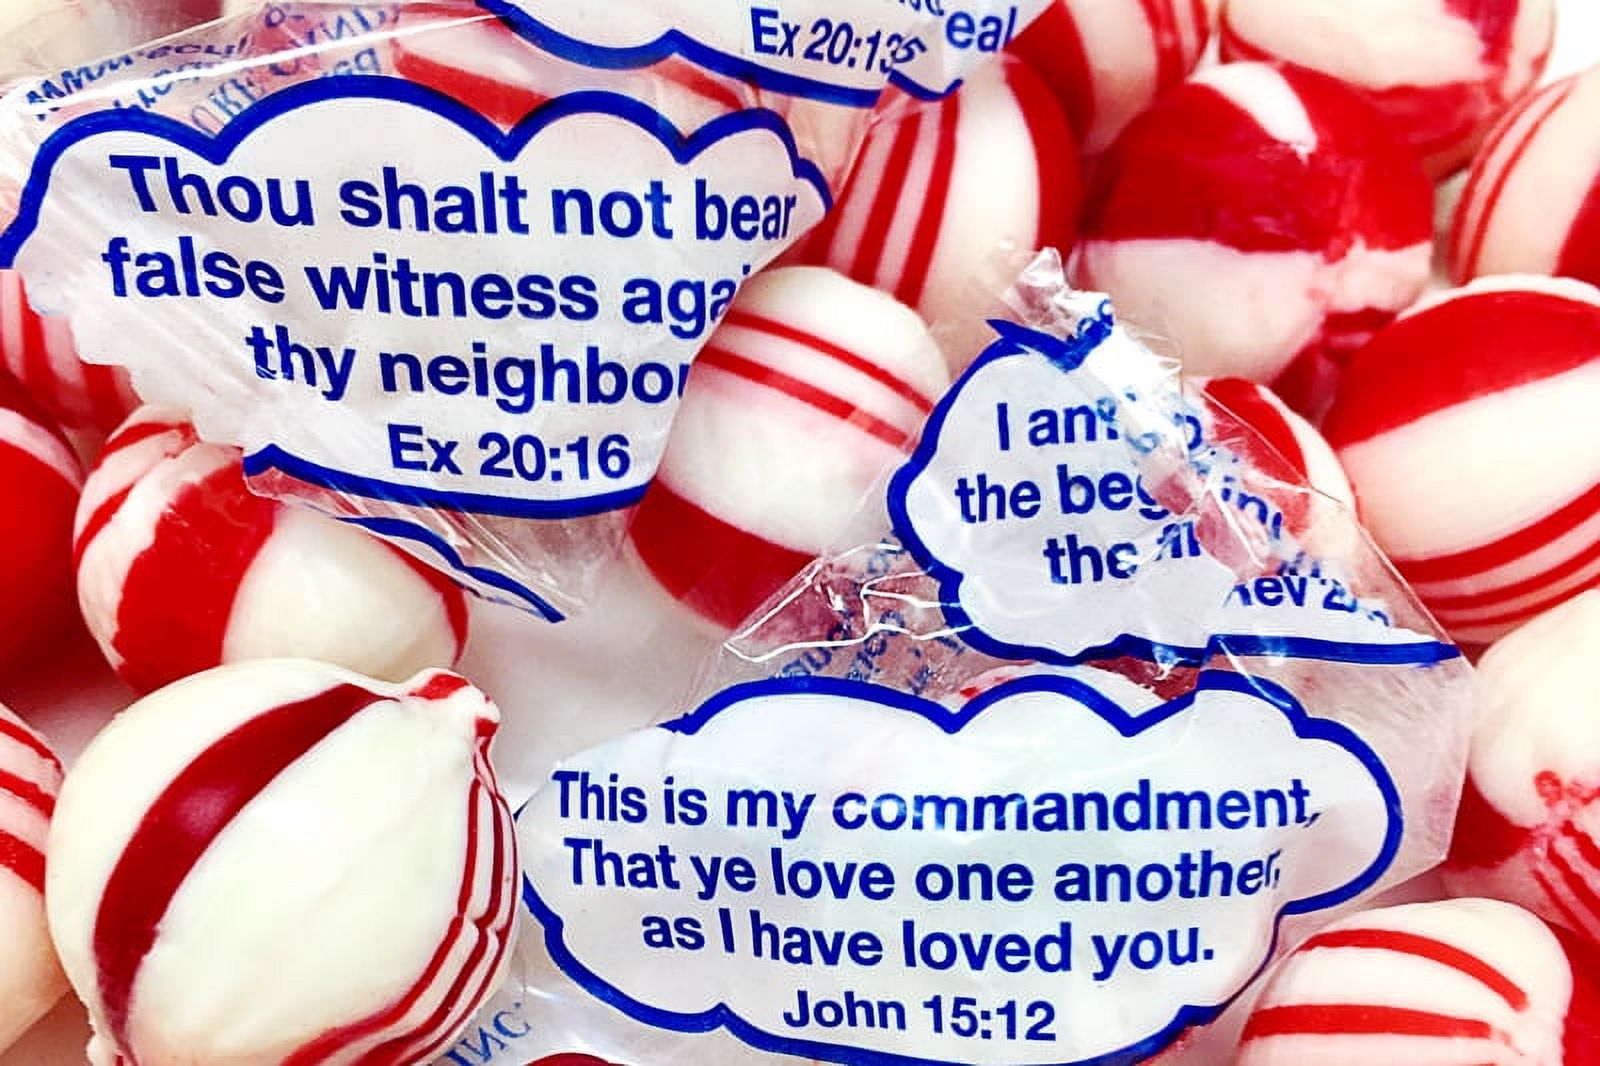 Candy-Scripture Old-Fashioned Hard Peppermint (6.05 Oz Bag) - image 2 of 3